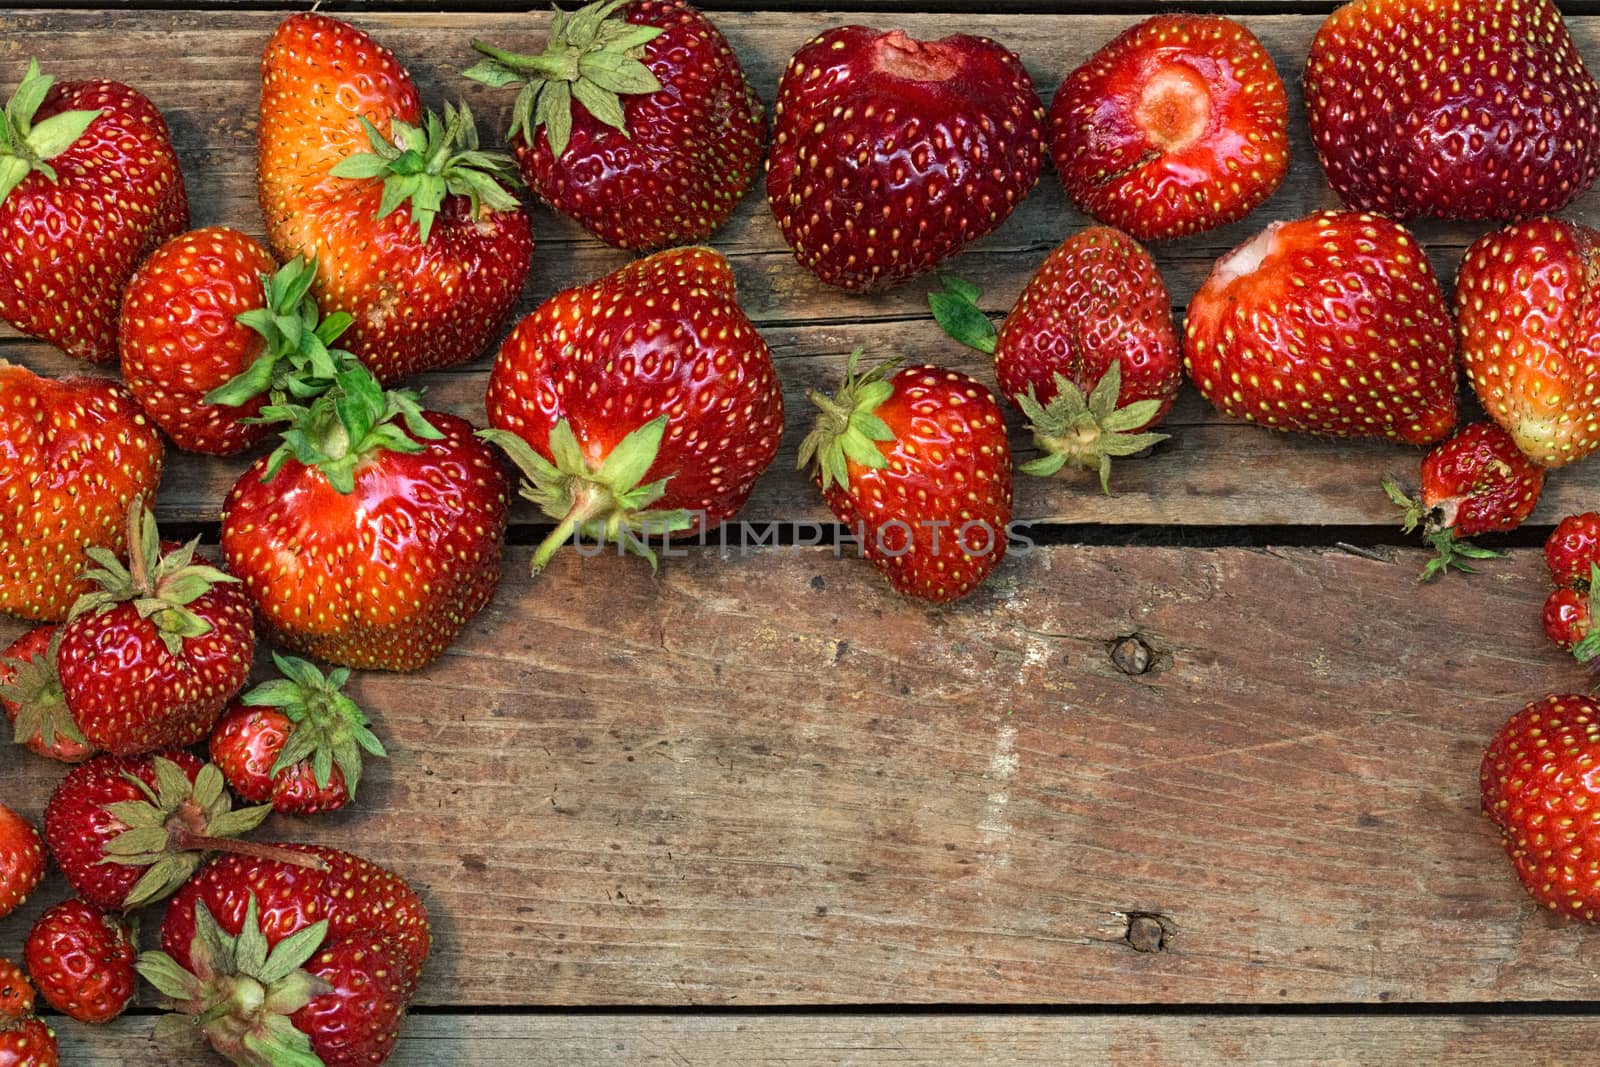 Several ripe red strawberries on a rough wooden background. View from above. Close-up image with copy-space